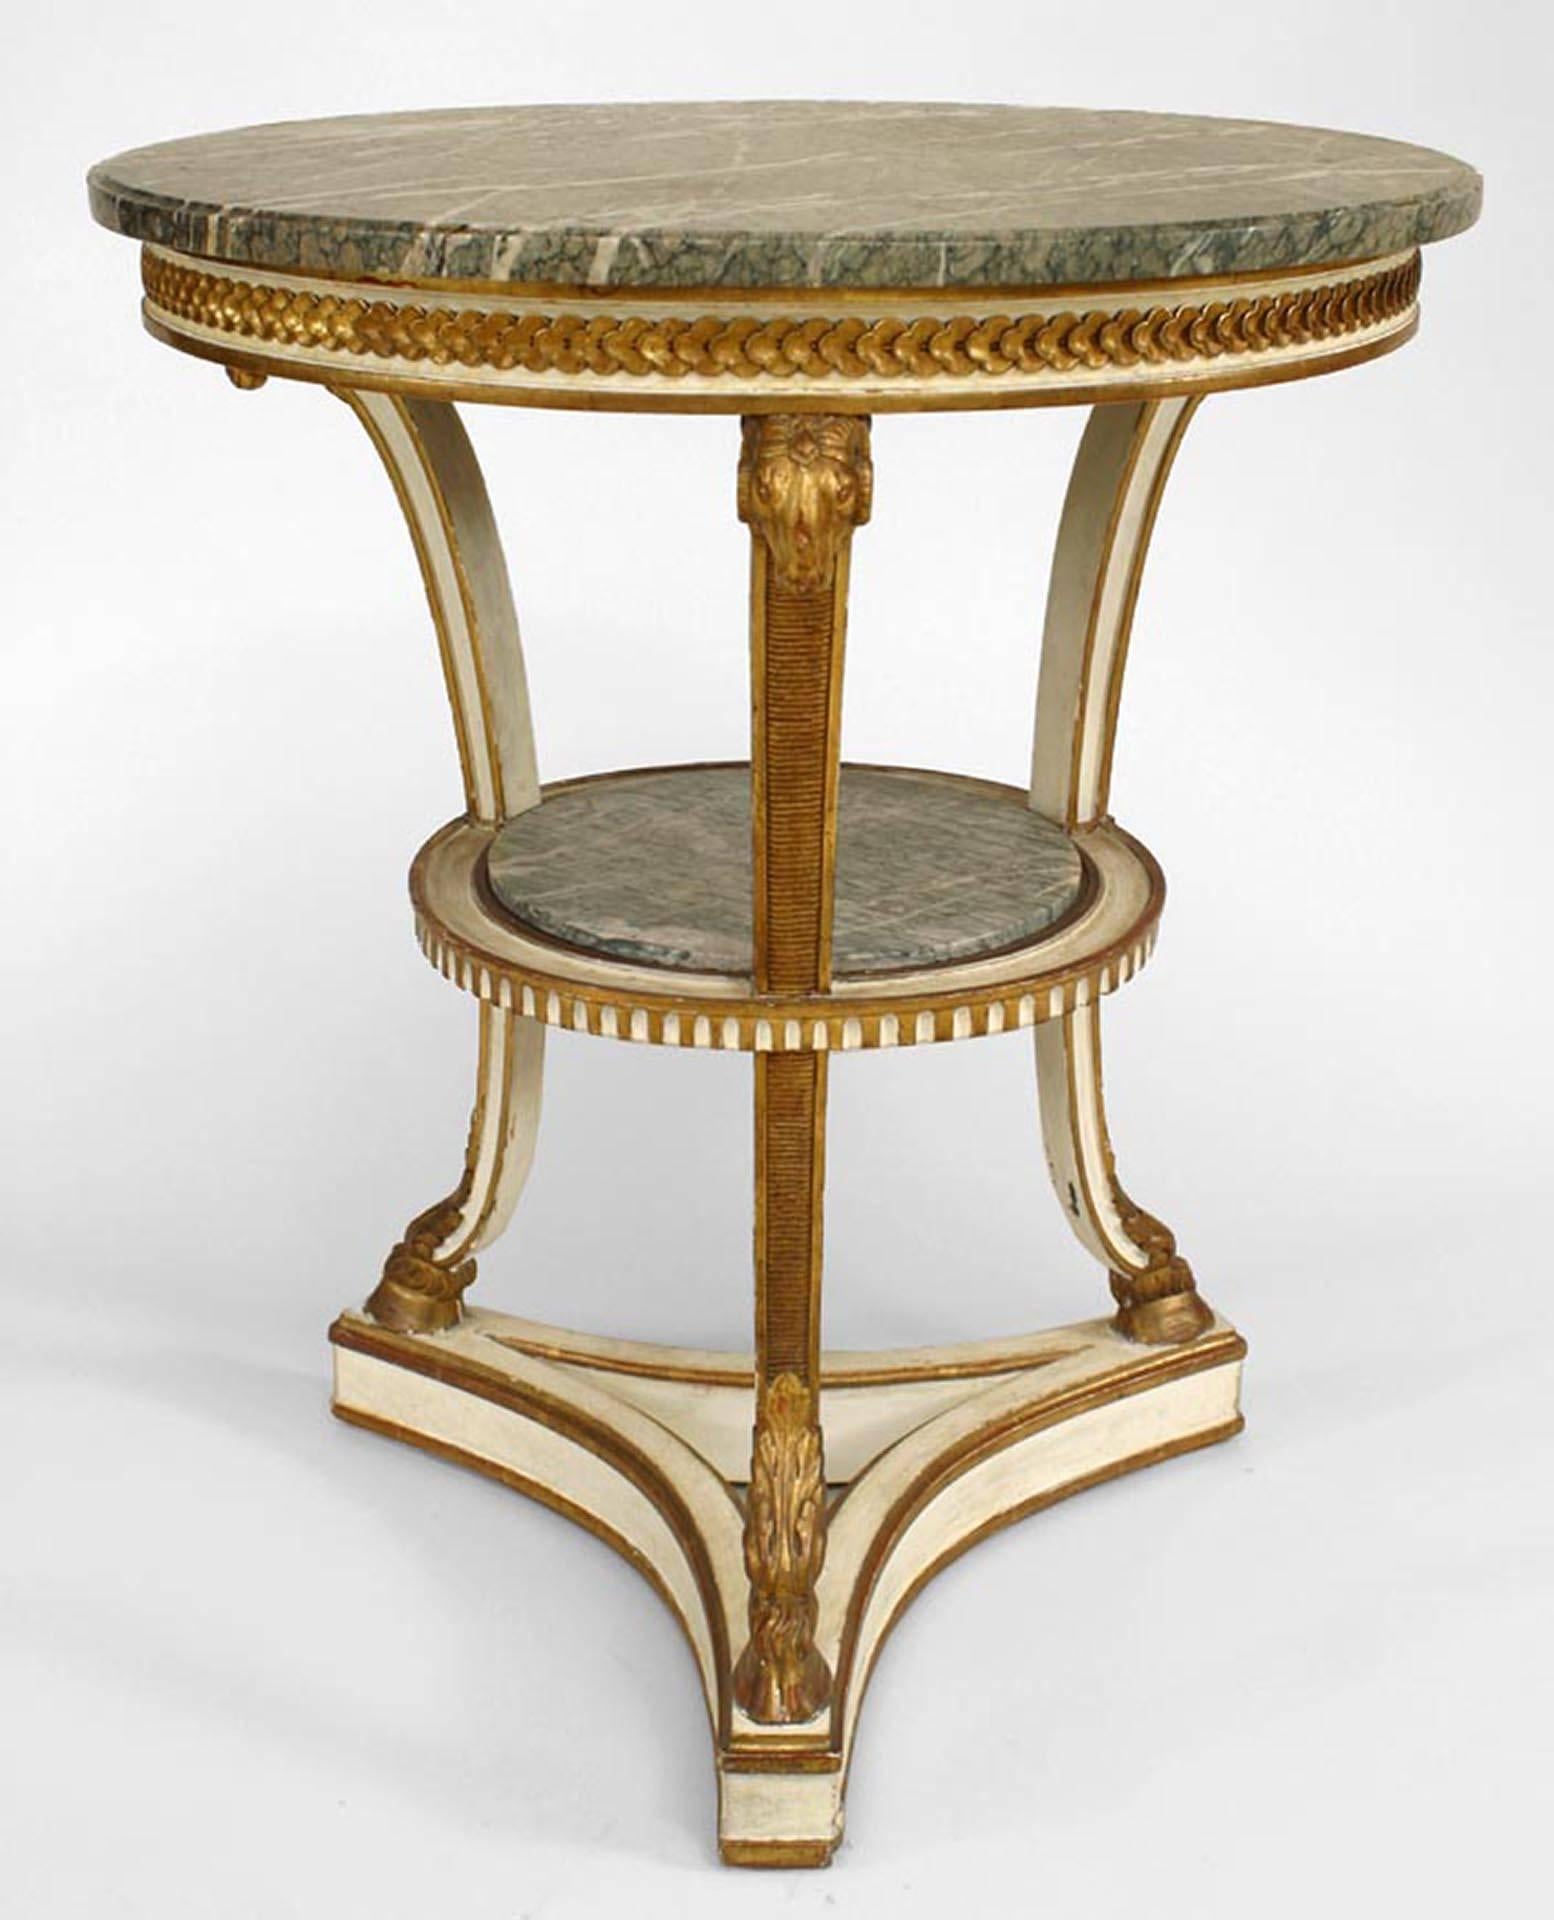 French Louis XVI-style (19th Century) white painted & gilt trim round gueridon table with 3 carved ram head legs and green marble top & shelf. (signed ESCALIER DE CRYSTAL, PARIS)
